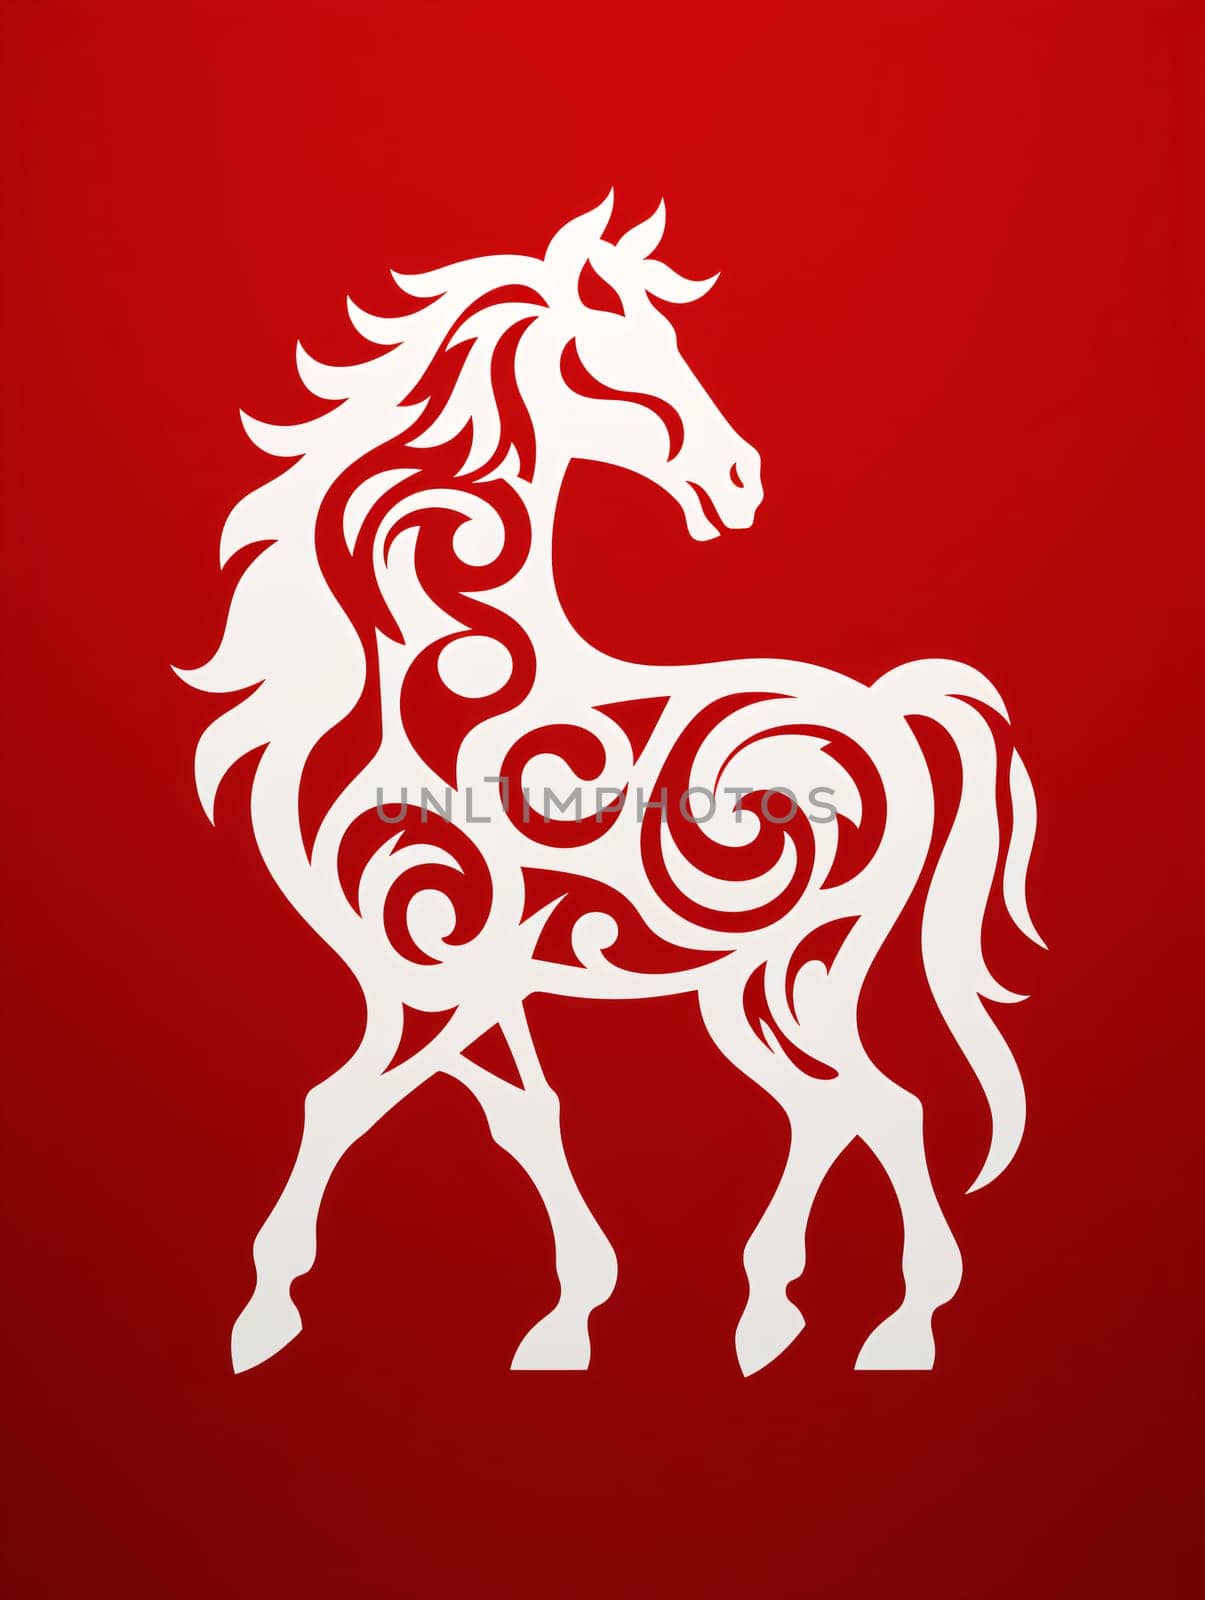 Stylized white horse silhouette with ornate swirls on a red background